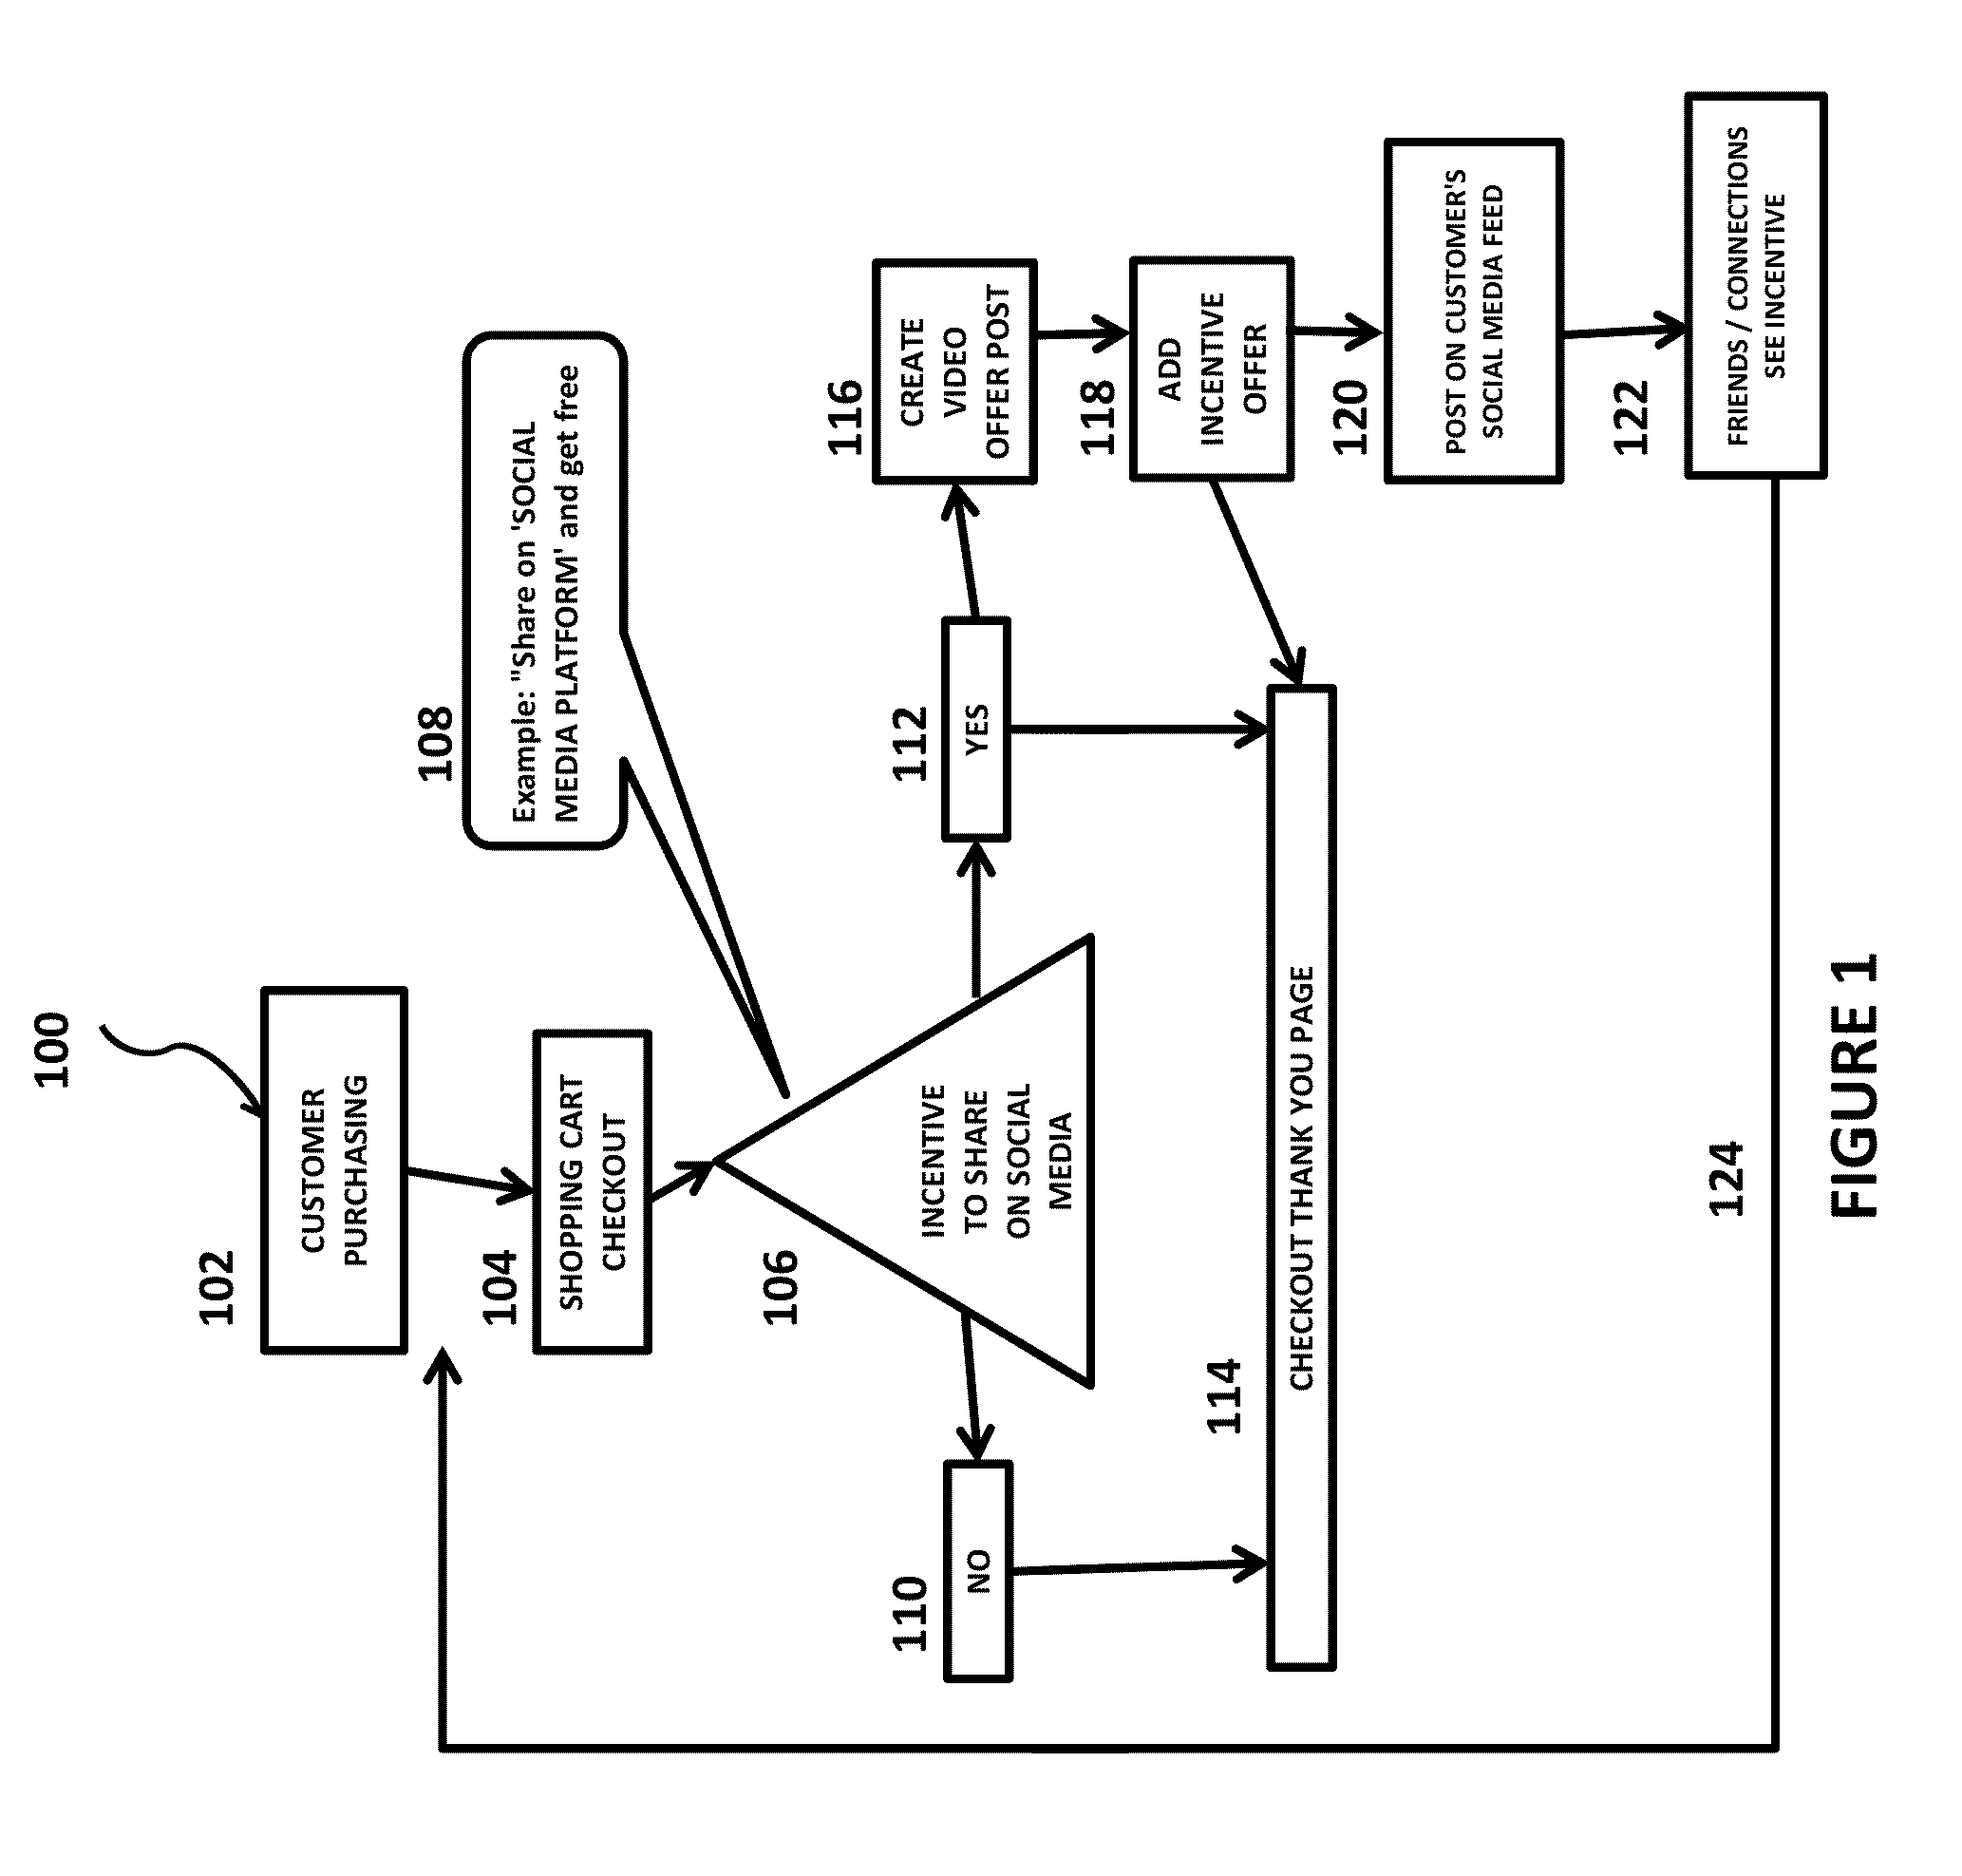 System and method for viral purchasing